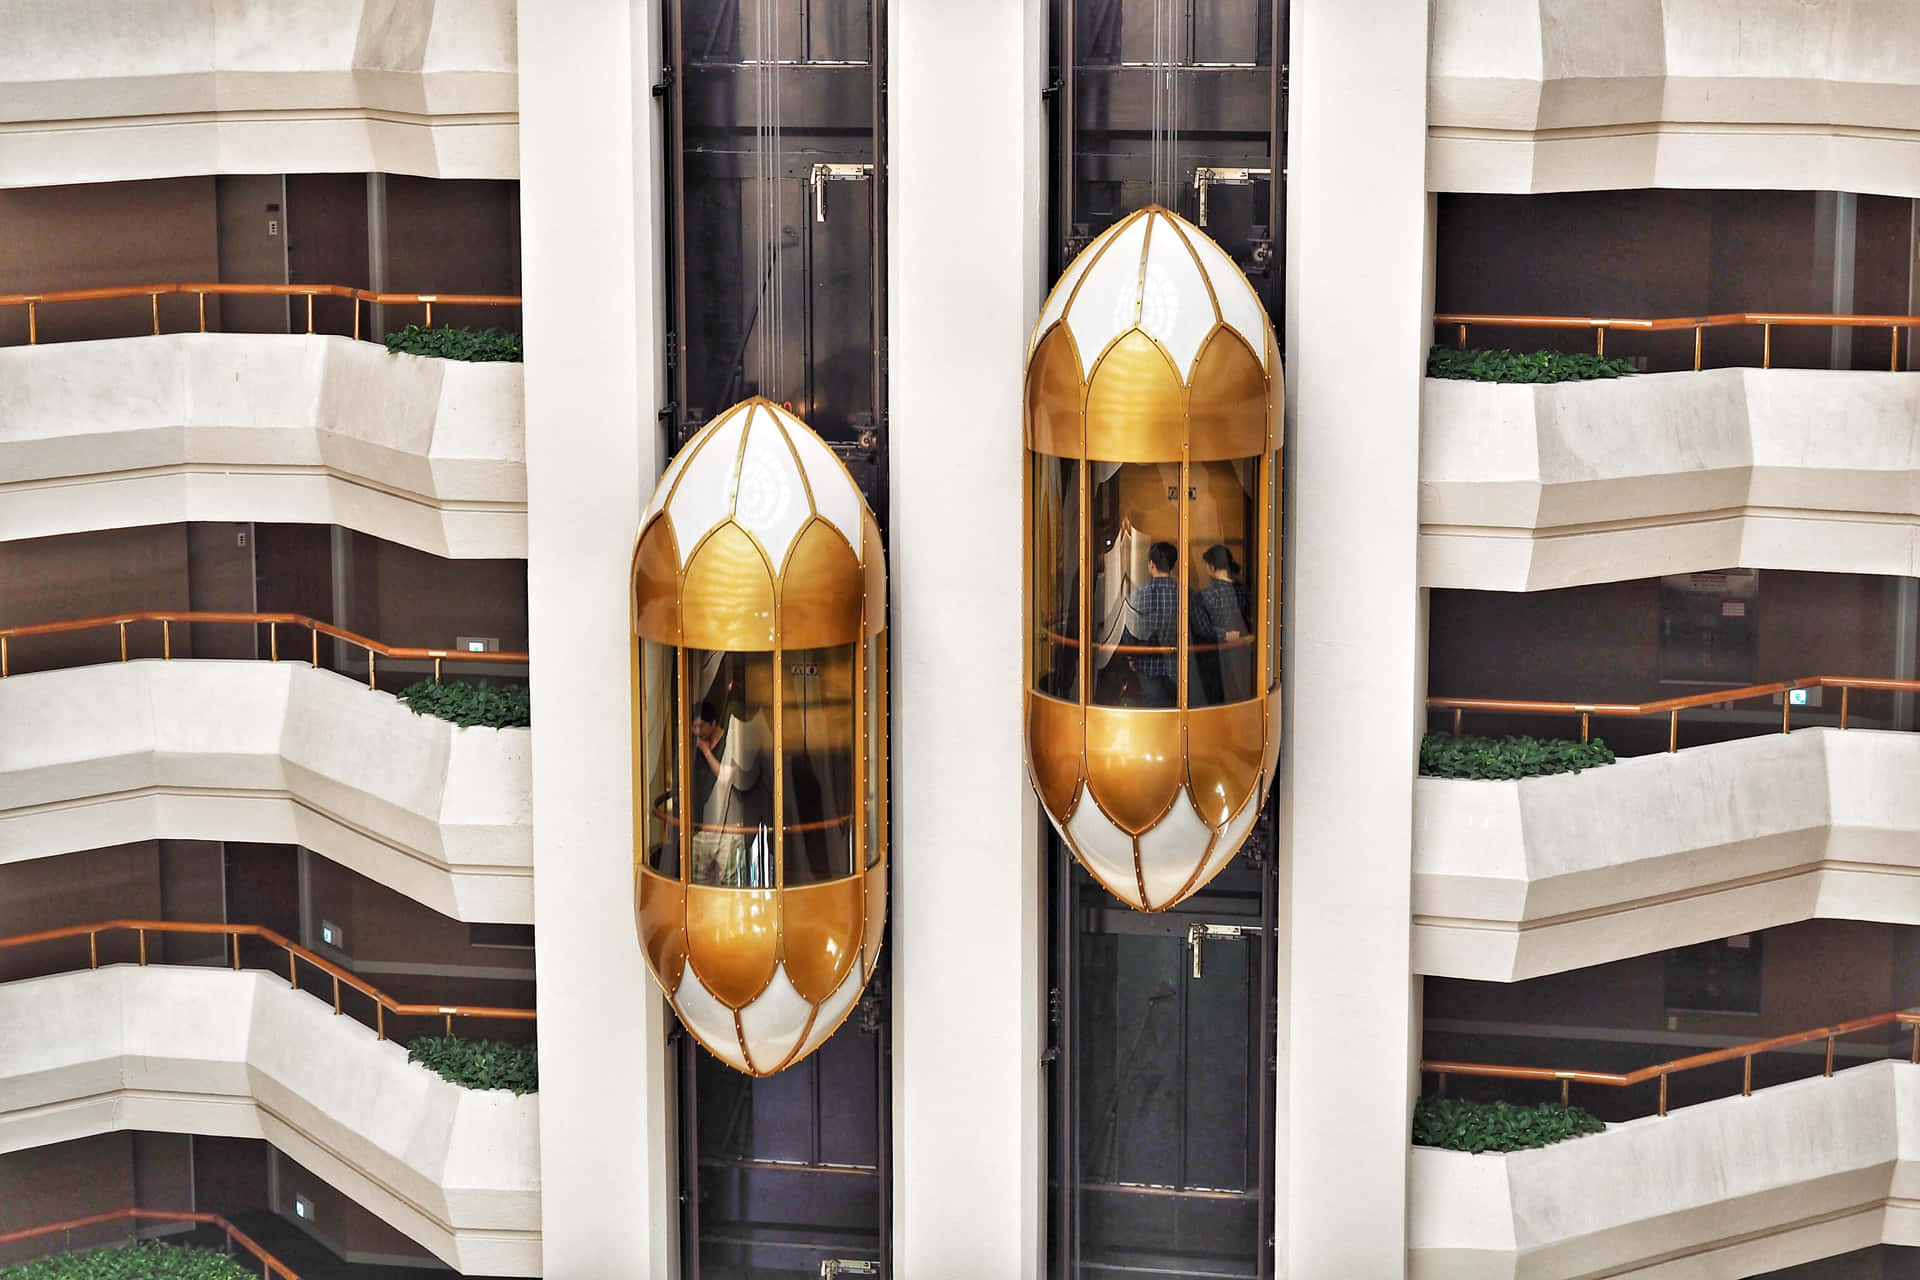 Modern glass elevator allowing for panoramic view